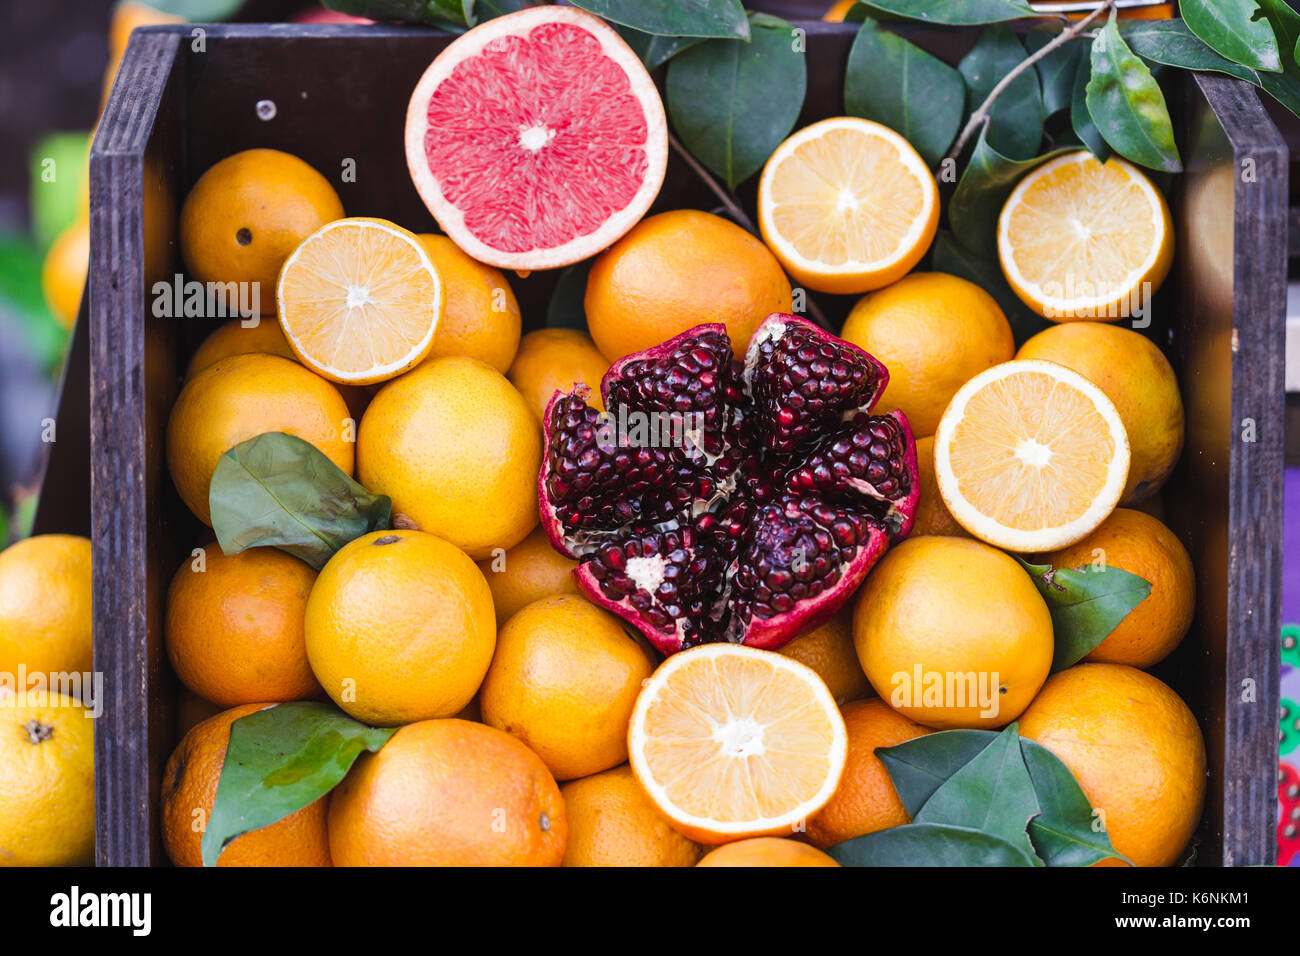 Mix tropic citrus fruits background.Fresh fruits close up.Healthy eating, dieting concept, clean eating. Making fresh juice outdoor Stock Photo